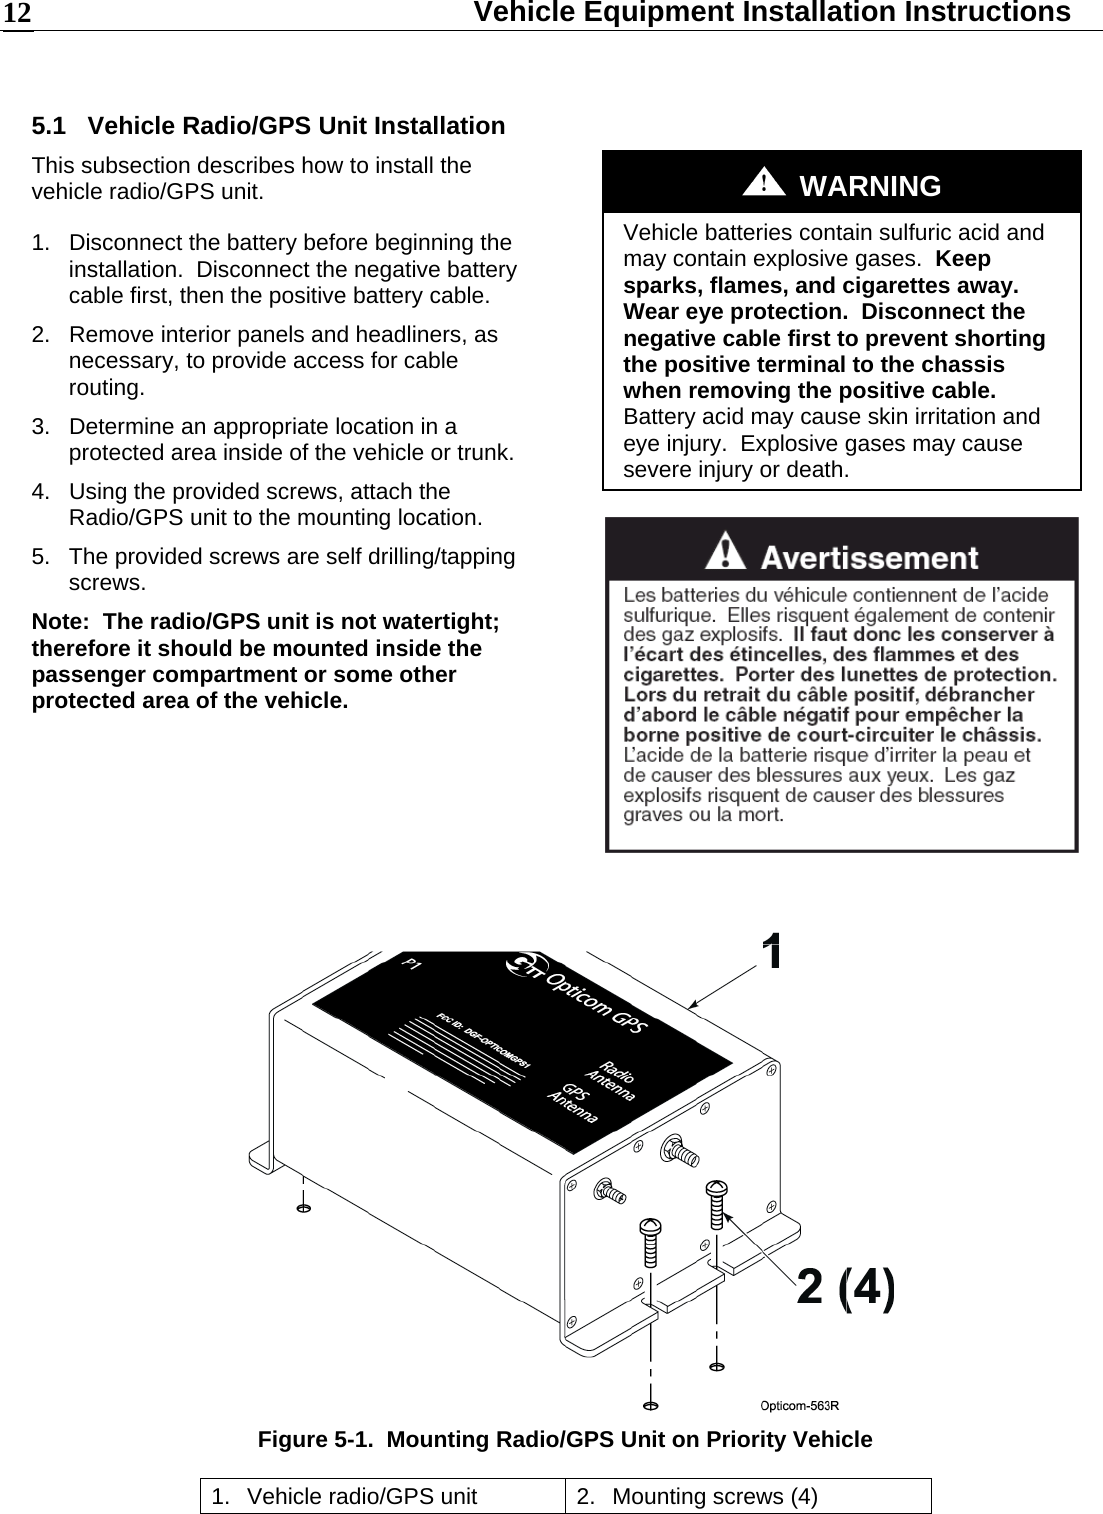  Vehicle Equipment Installation Instructions 12 5.1 Vehicle Radio/GPS Unit Installation This subsection describes how to install the vehicle radio/GPS unit. 1.  Disconnect the battery before beginning the installation.  Disconnect the negative battery cable first, then the positive battery cable. 2.  Remove interior panels and headliners, as necessary, to provide access for cable routing. 3.  Determine an appropriate location in a protected area inside of the vehicle or trunk. 4.  Using the provided screws, attach the Radio/GPS unit to the mounting location. 5.  The provided screws are self drilling/tapping screws. Note:  The radio/GPS unit is not watertight; therefore it should be mounted inside the passenger compartment or some other protected area of the vehicle.     WARNING Vehicle batteries contain sulfuric acid and may contain explosive gases.  Keep sparks, flames, and cigarettes away.  Wear eye protection.  Disconnect the negative cable first to prevent shorting the positive terminal to the chassis when removing the positive cable.  Battery acid may cause skin irritation and eye injury.  Explosive gases may cause severe injury or death.    Figure 5-1.  Mounting Radio/GPS Unit on Priority Vehicle 1.  Vehicle radio/GPS unit  2.  Mounting screws (4) 